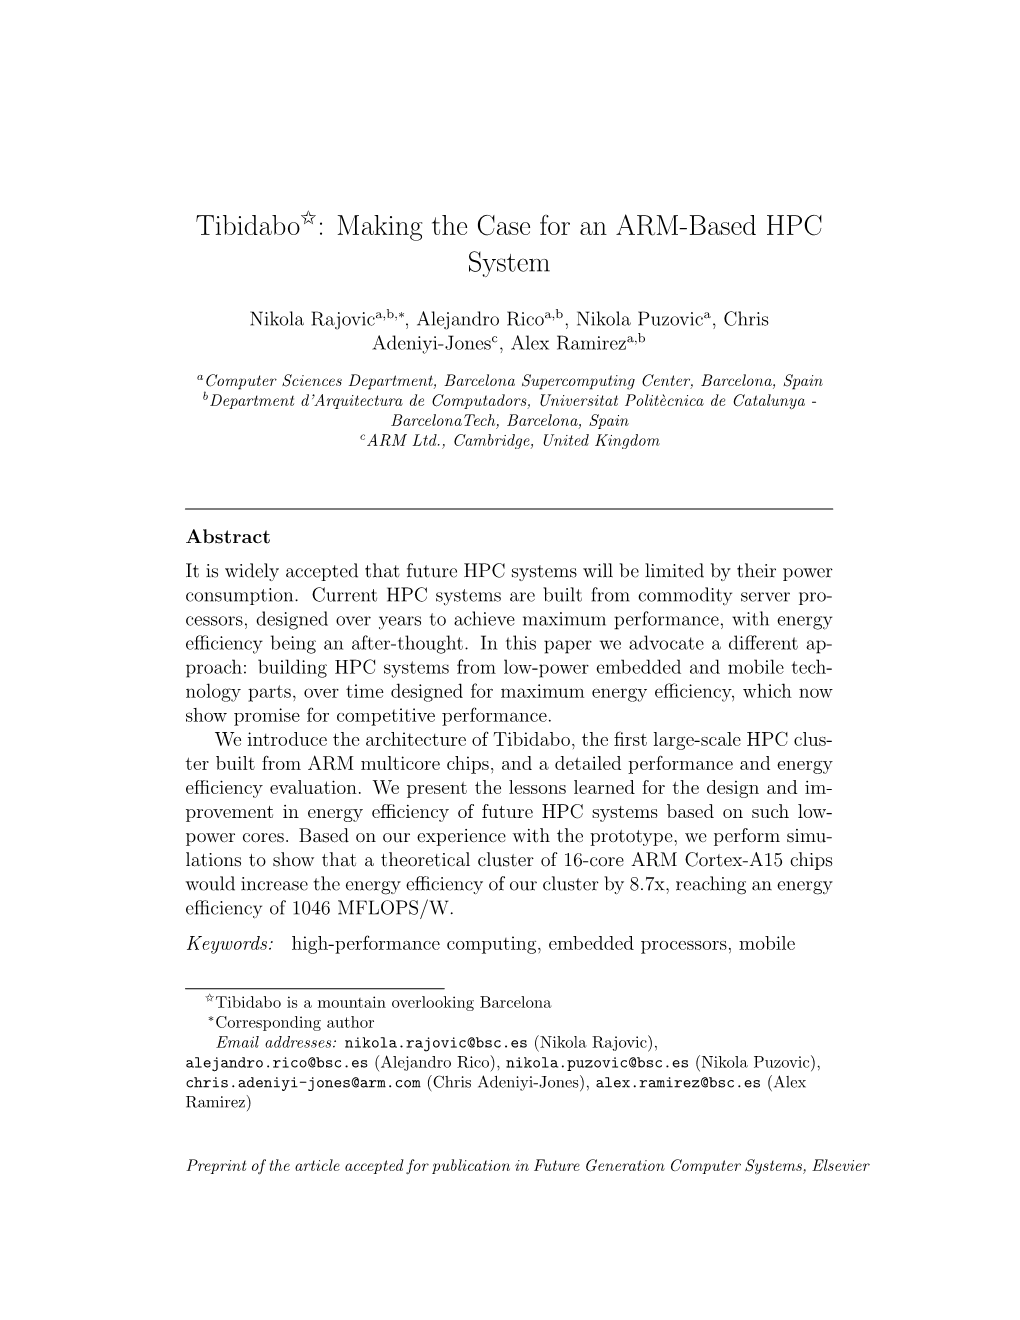 Tibidabo$: Making the Case for an ARM-Based HPC System